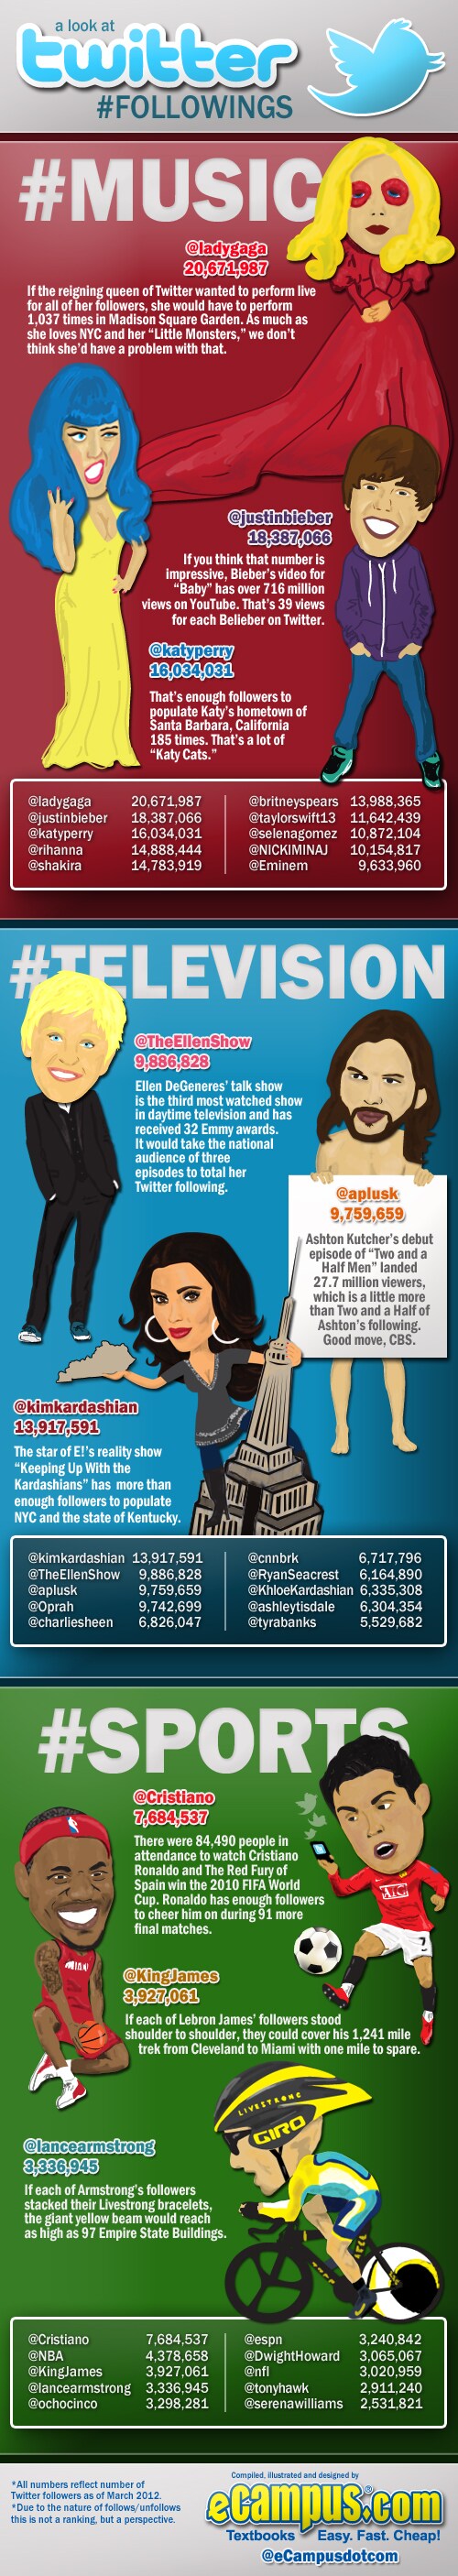 A Look at Celeb Twitter Followers (Infographic)